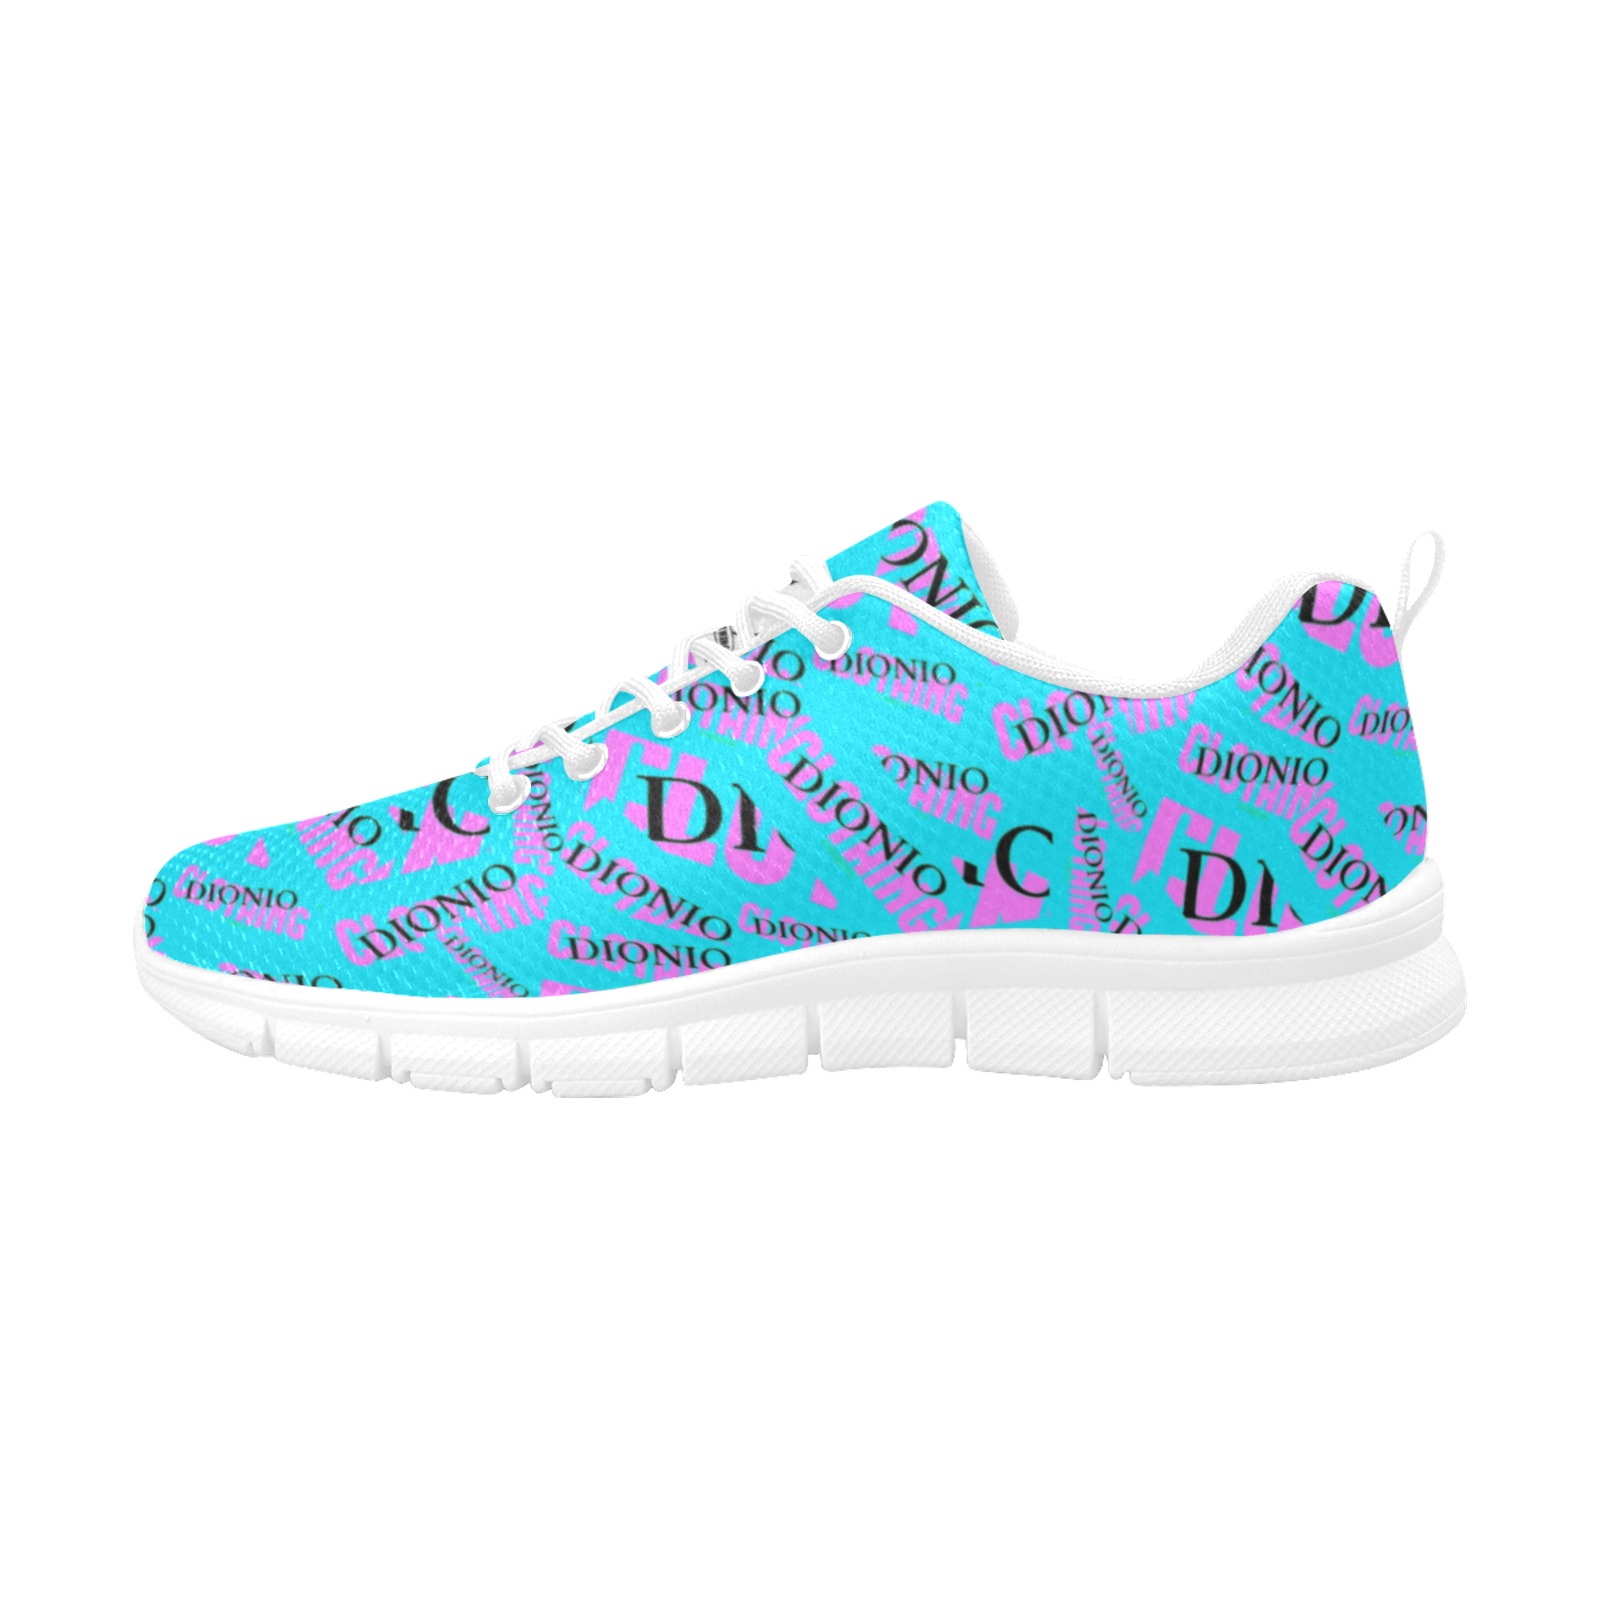 DIONIO - Women's Running Shoe (Company Turquoise & Pink Logo) Women's Breathable Running Shoes (Model 055)